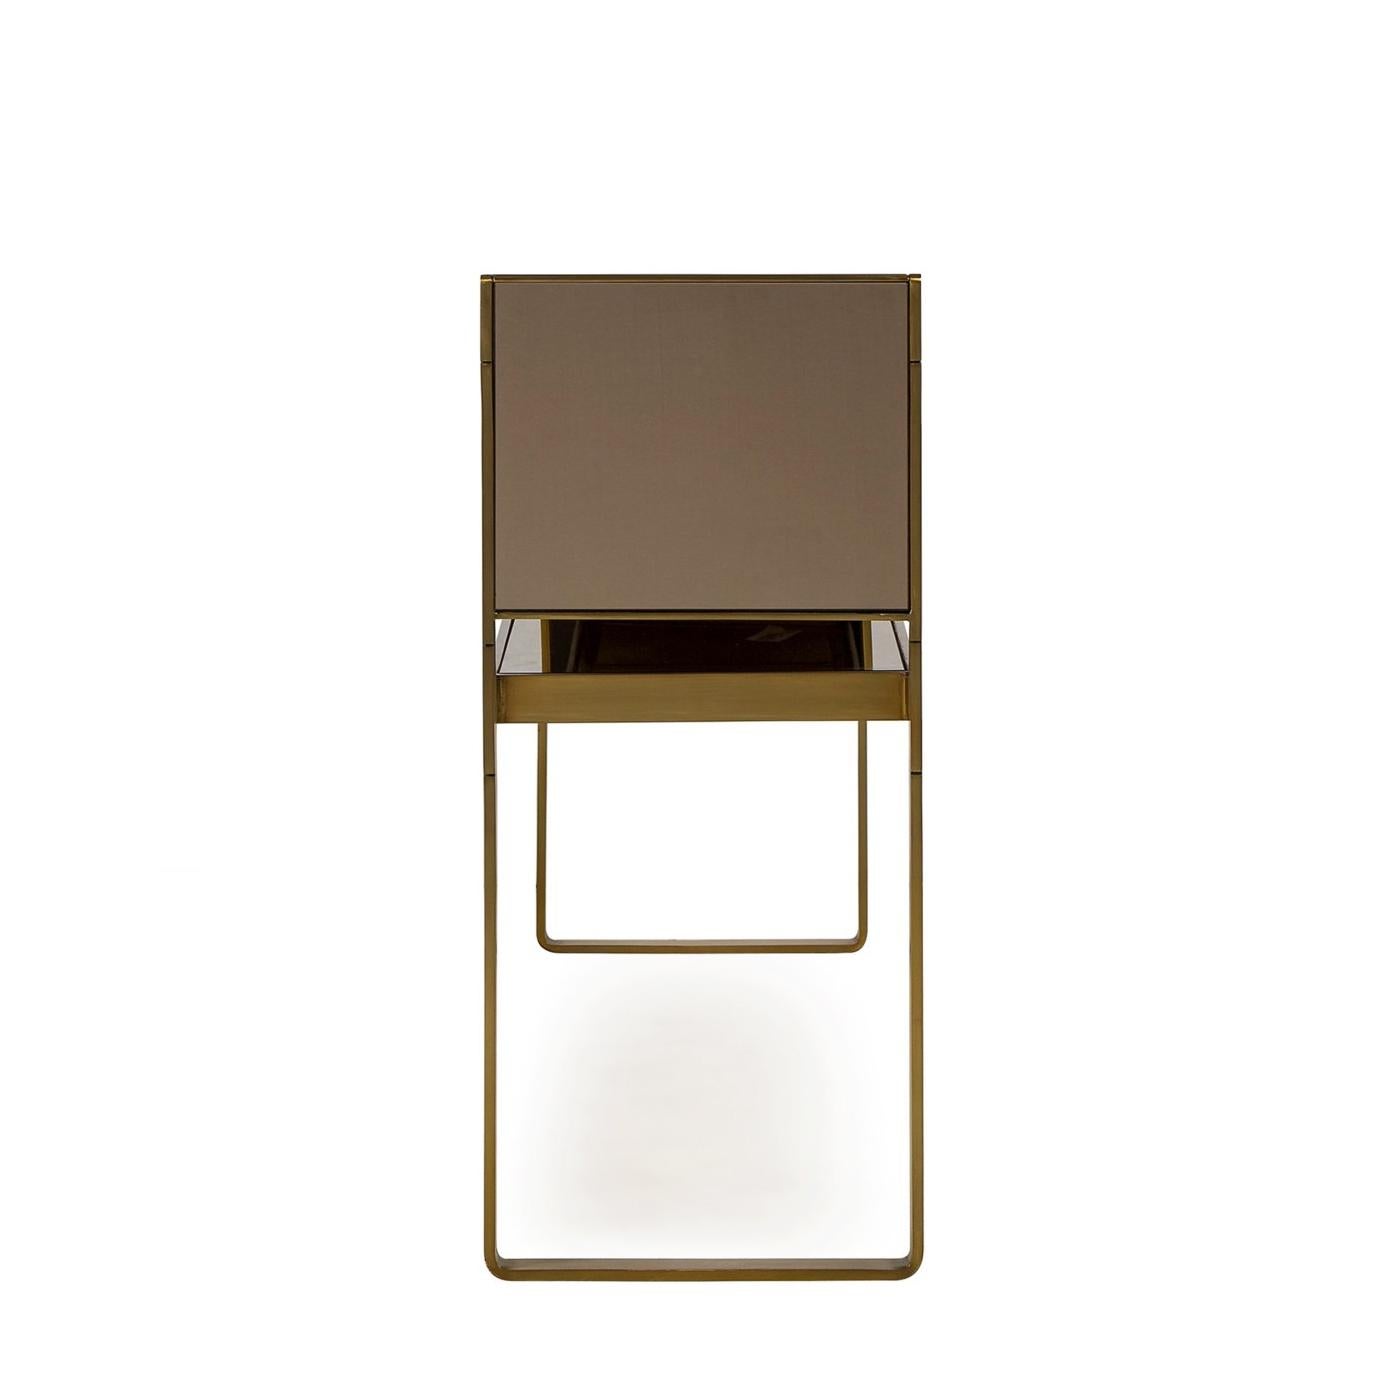 Brushed Sturdy Console Table in Satin Brass Finish